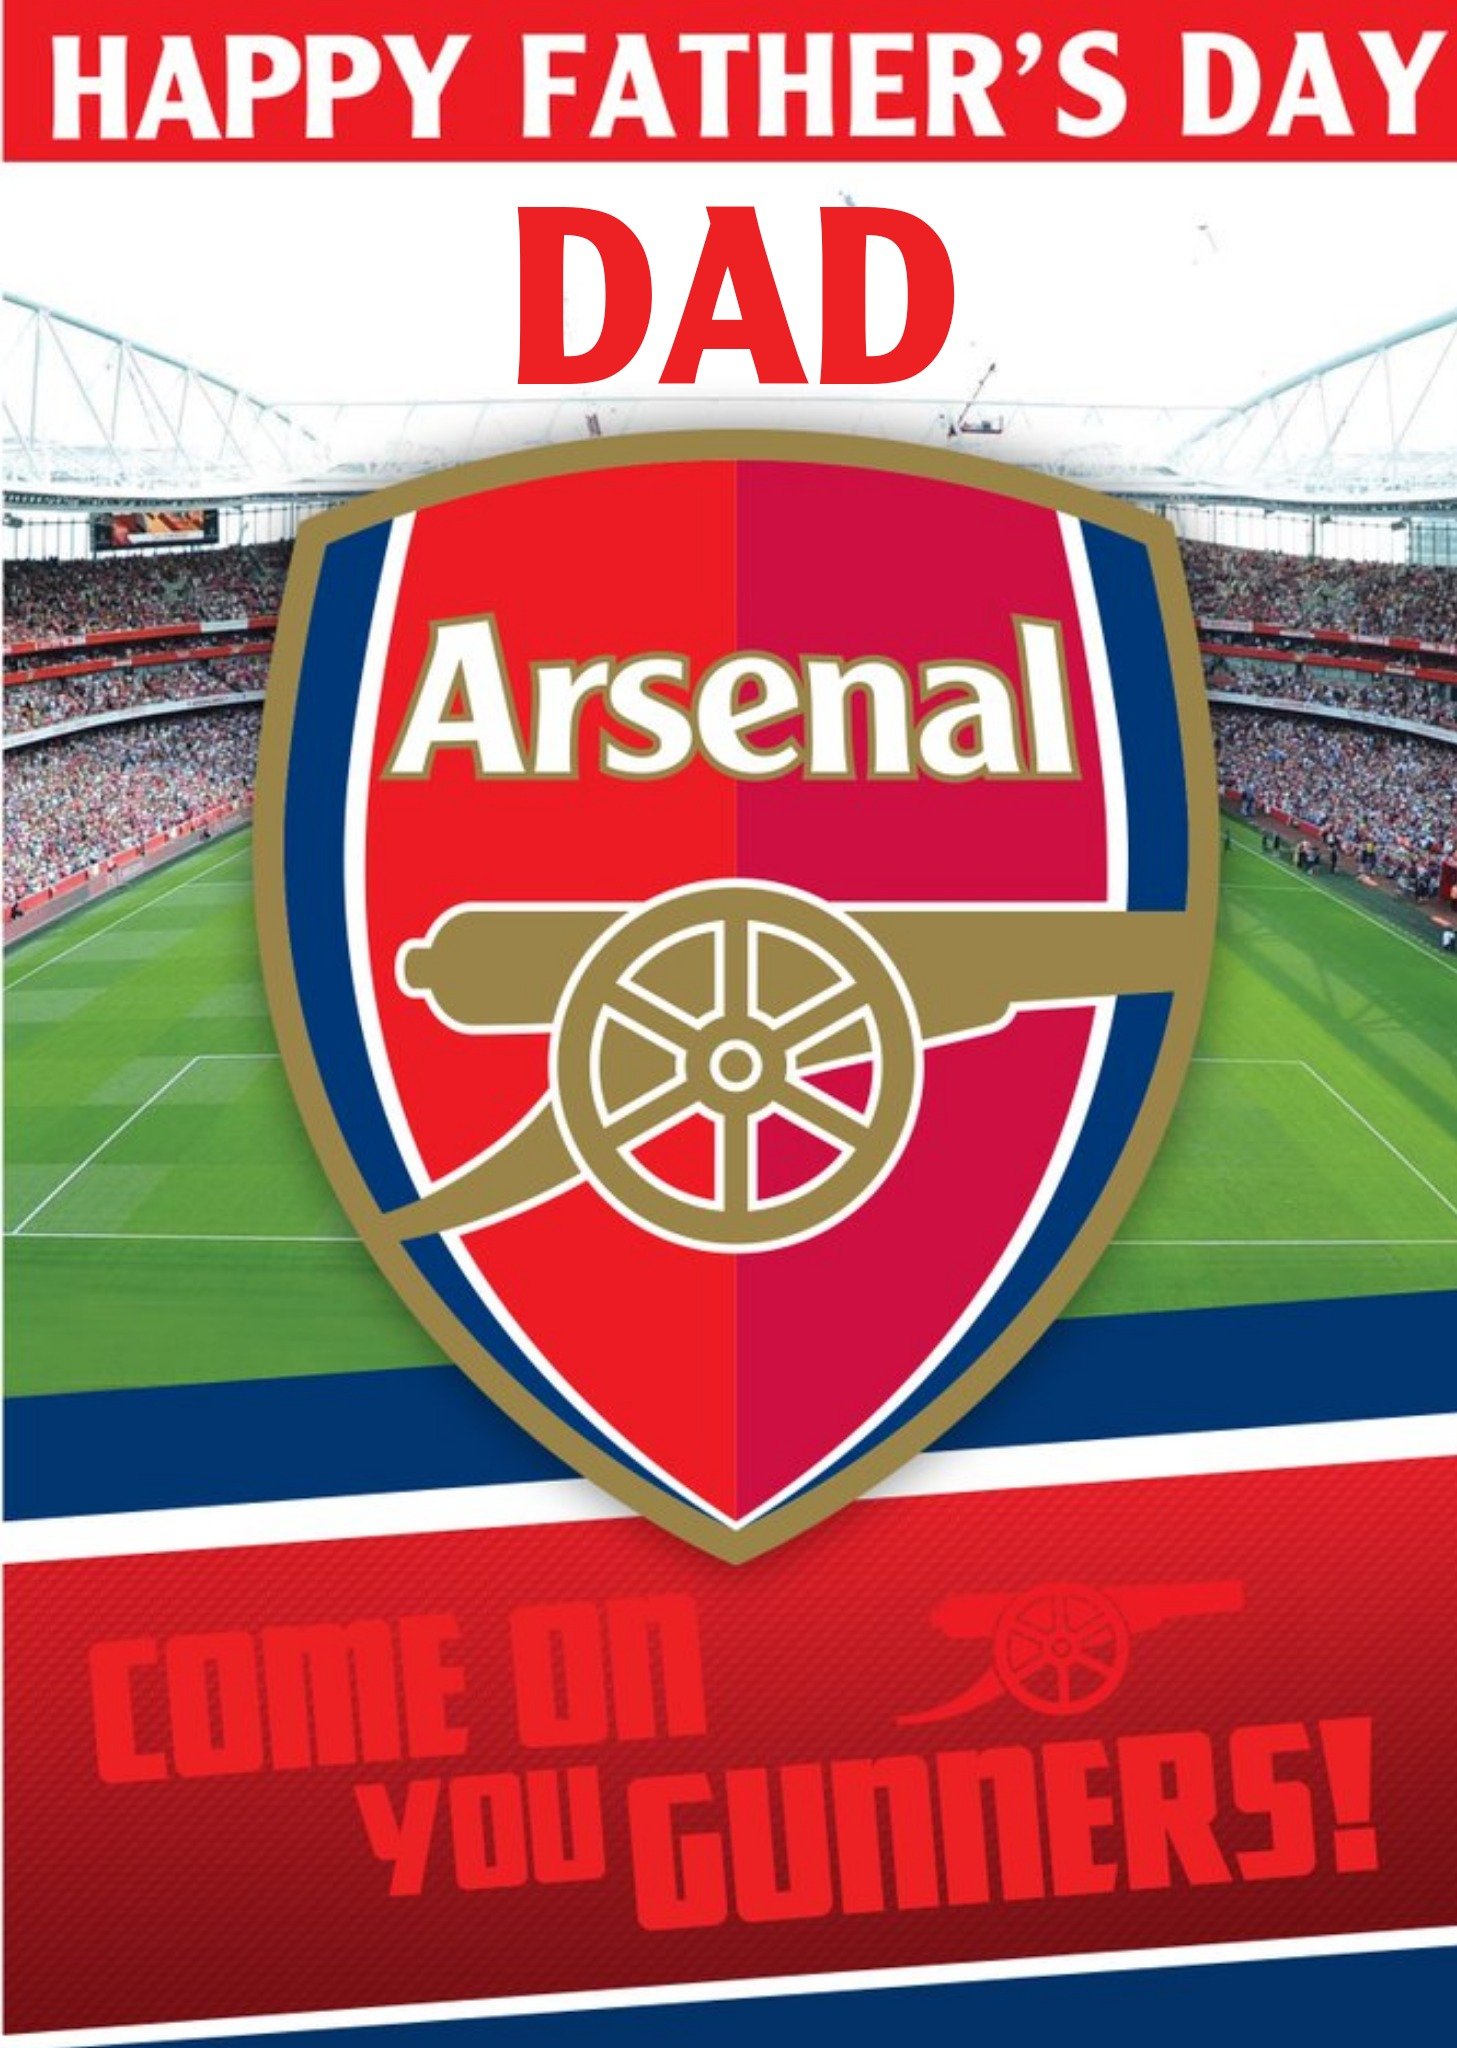 Arsenal Football Stadium Come On You Gunners Happy Father's Day Card, Large